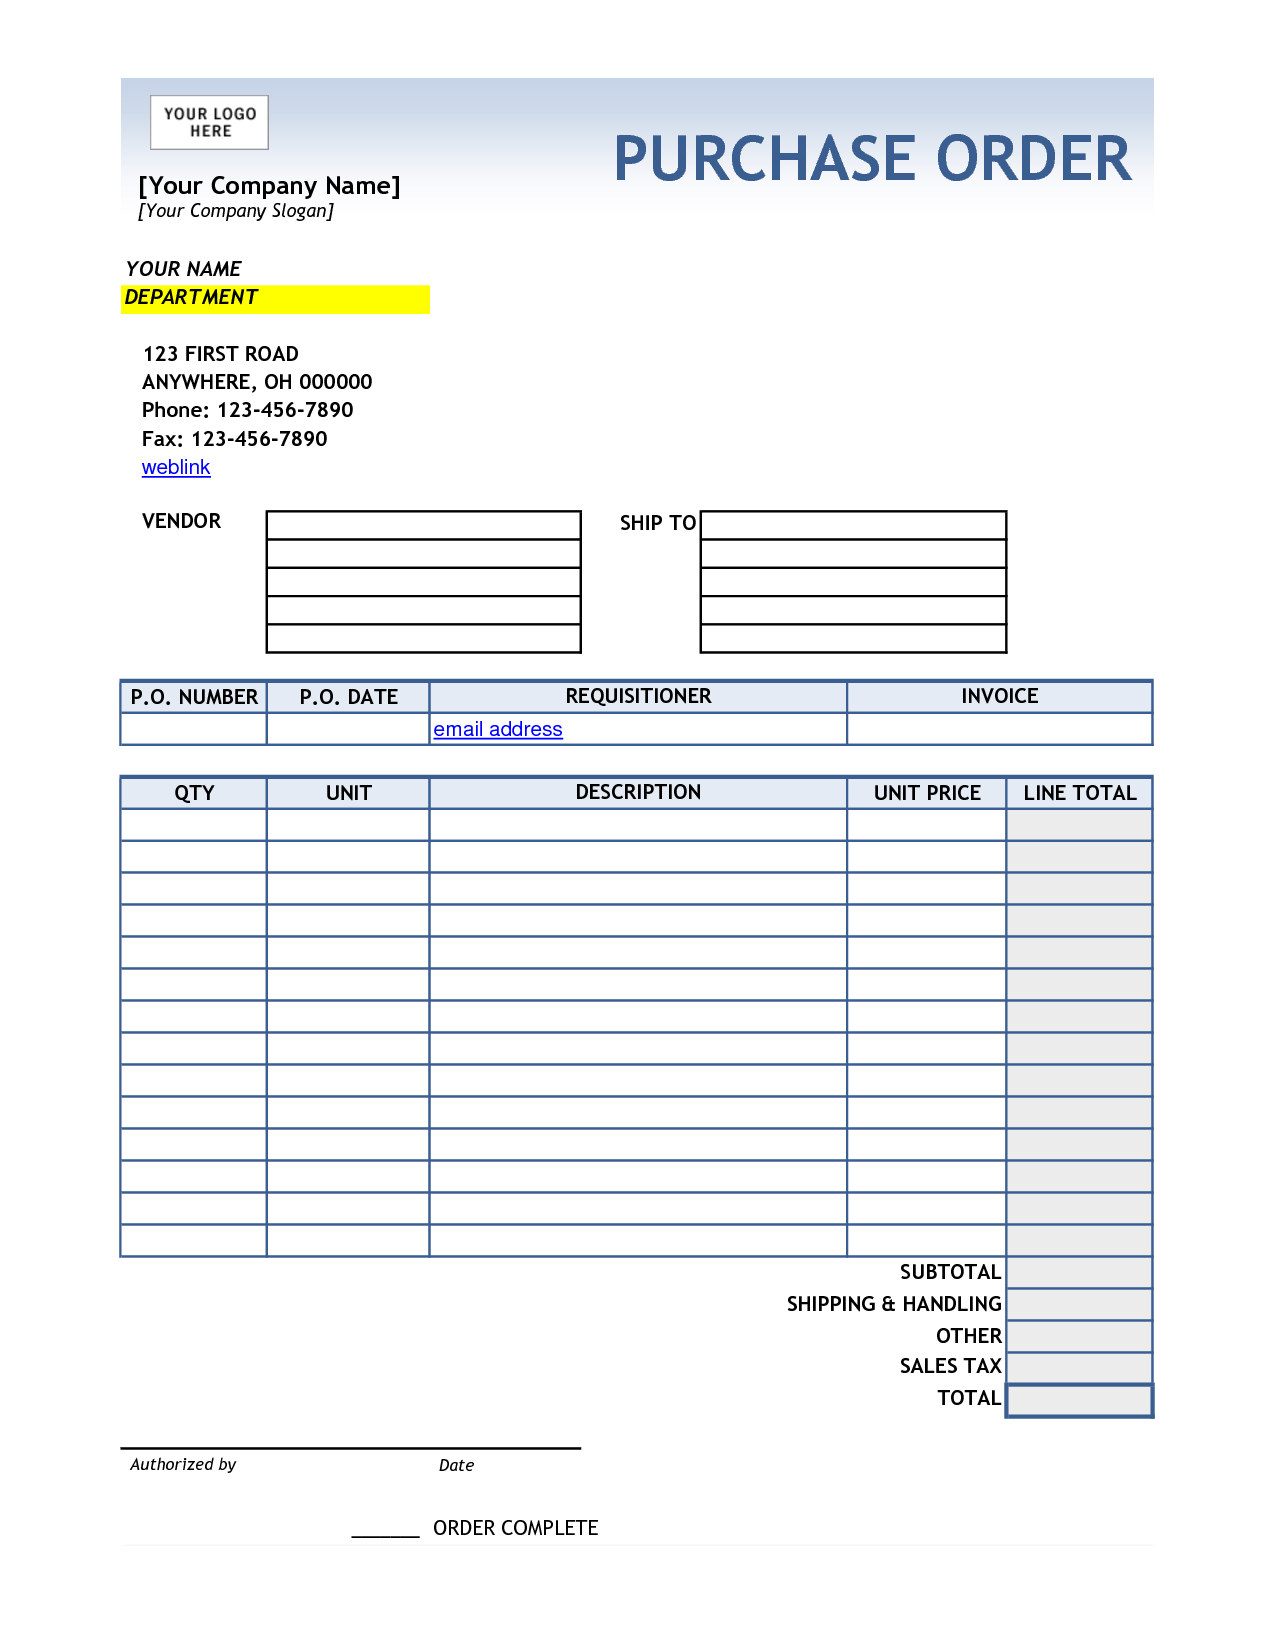 Printable Purchase Order Form Printable Forms Free Online